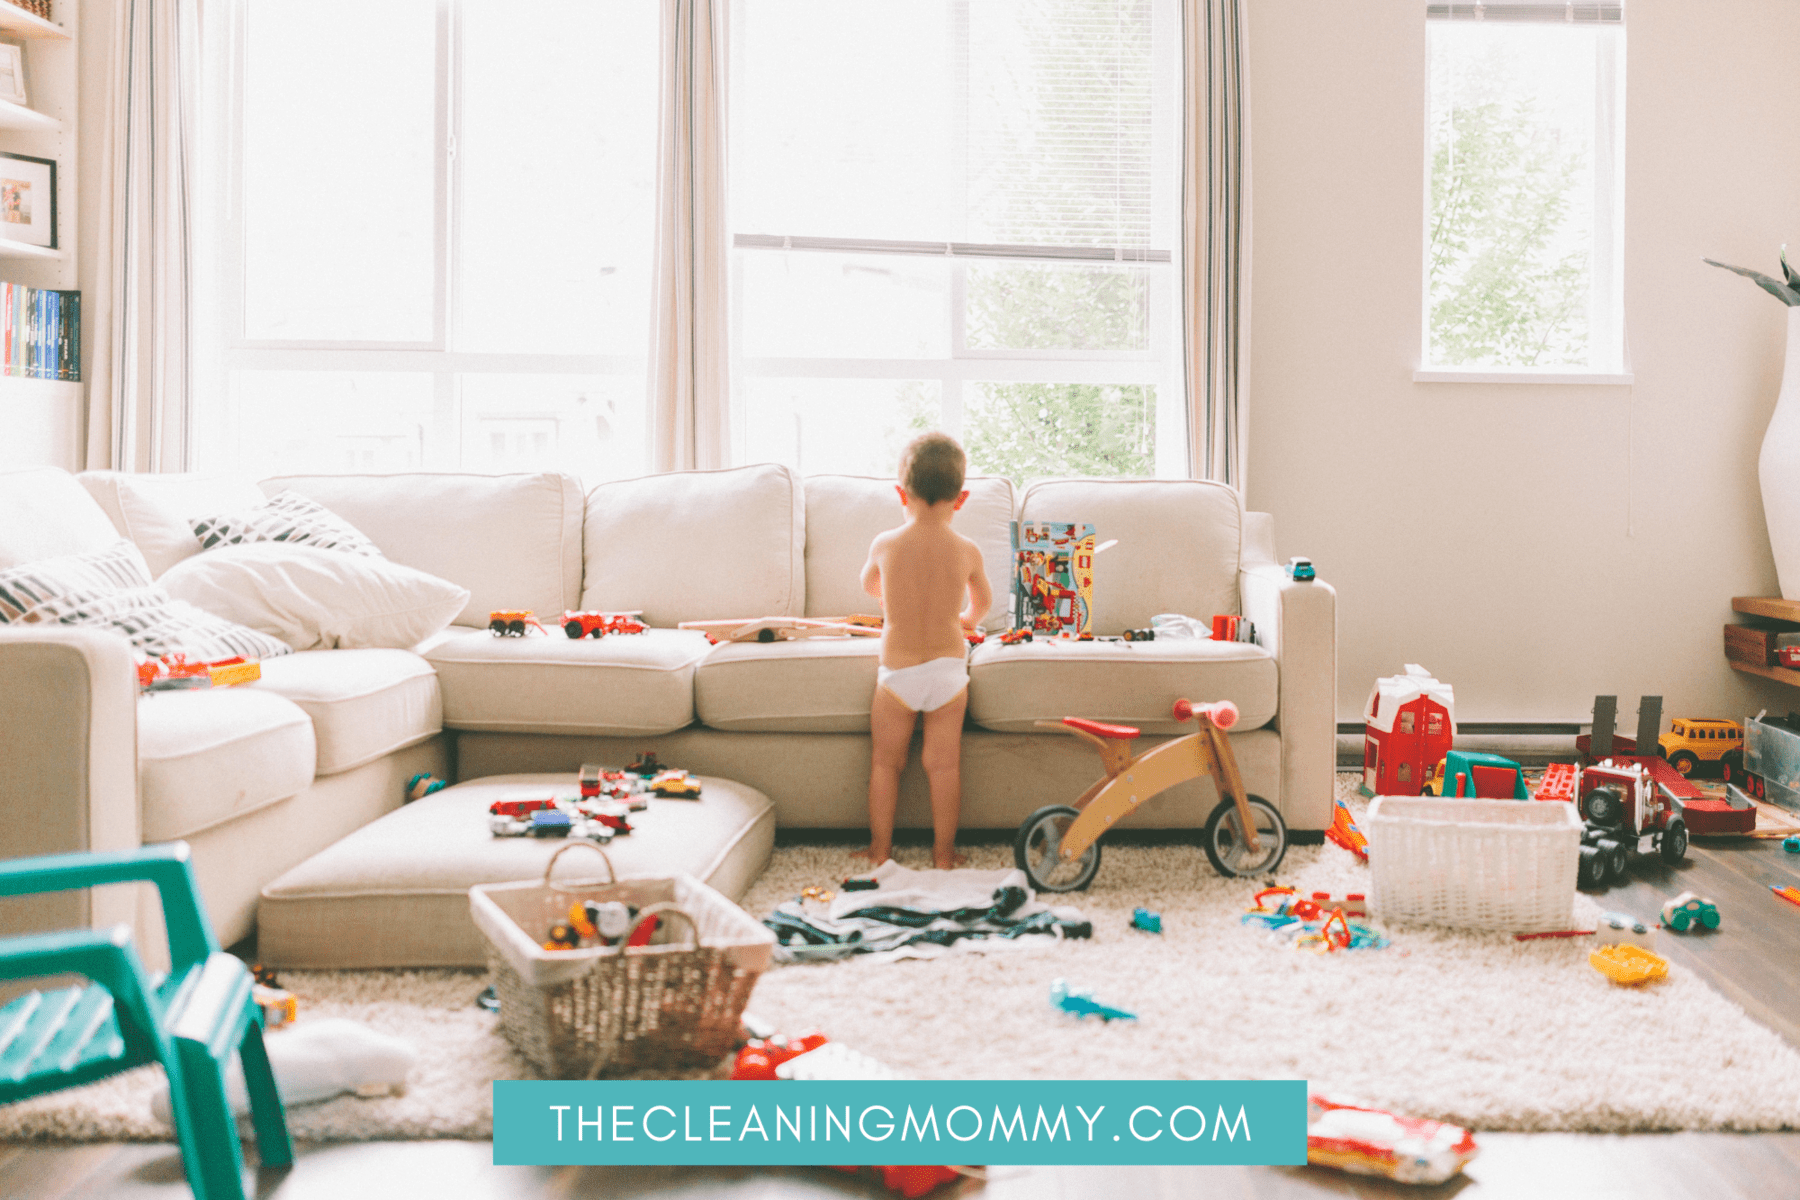 Messy house with baby in diapers